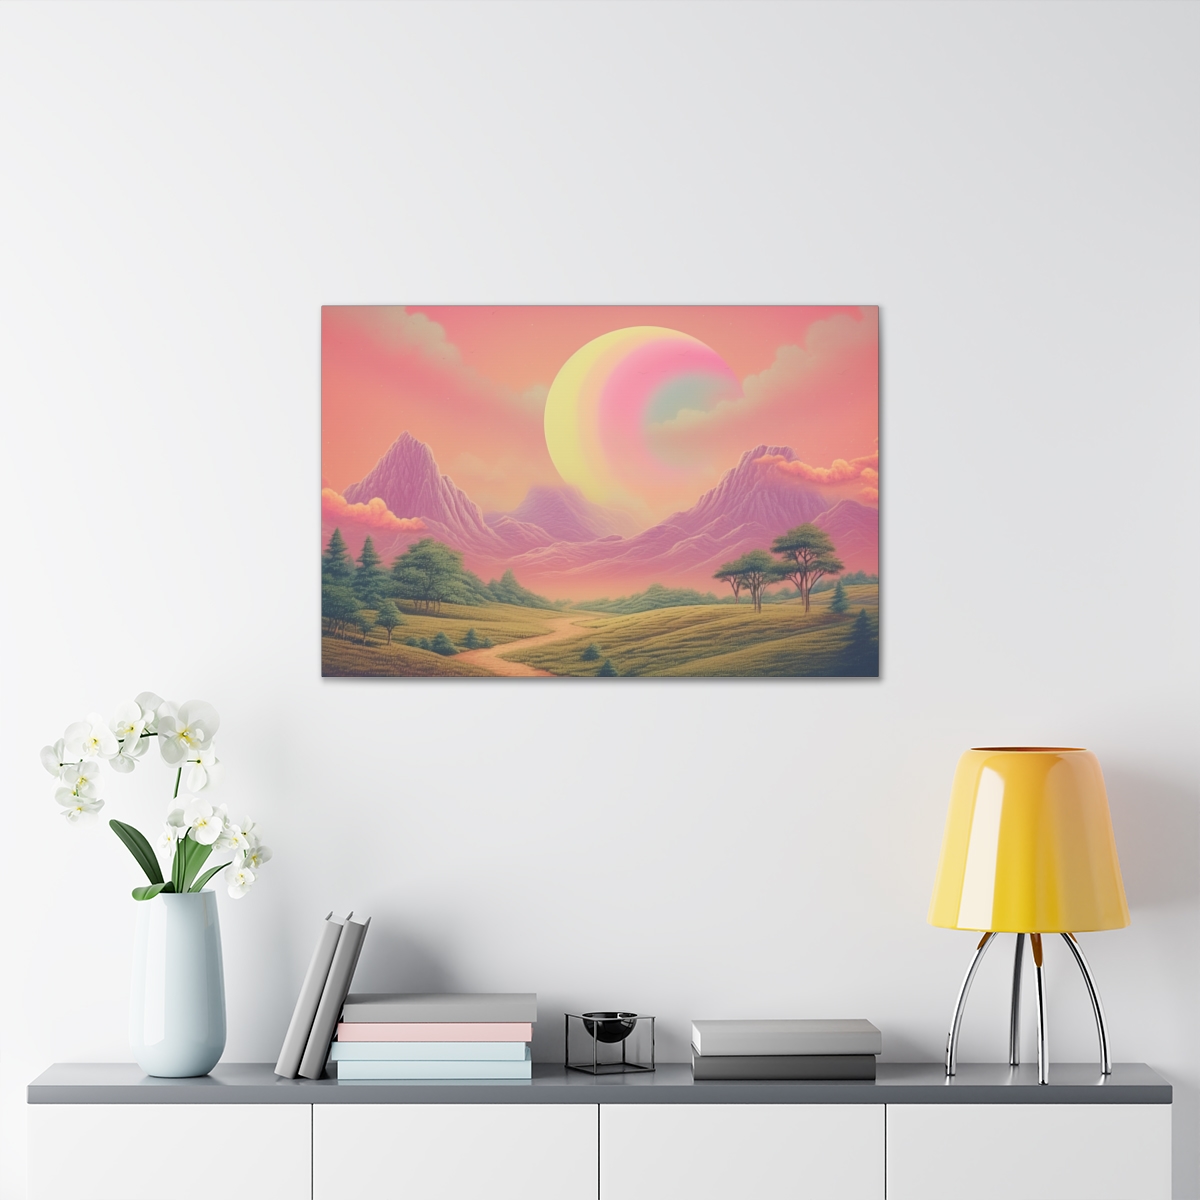 Ethereal Art: Mountains Of Dreams